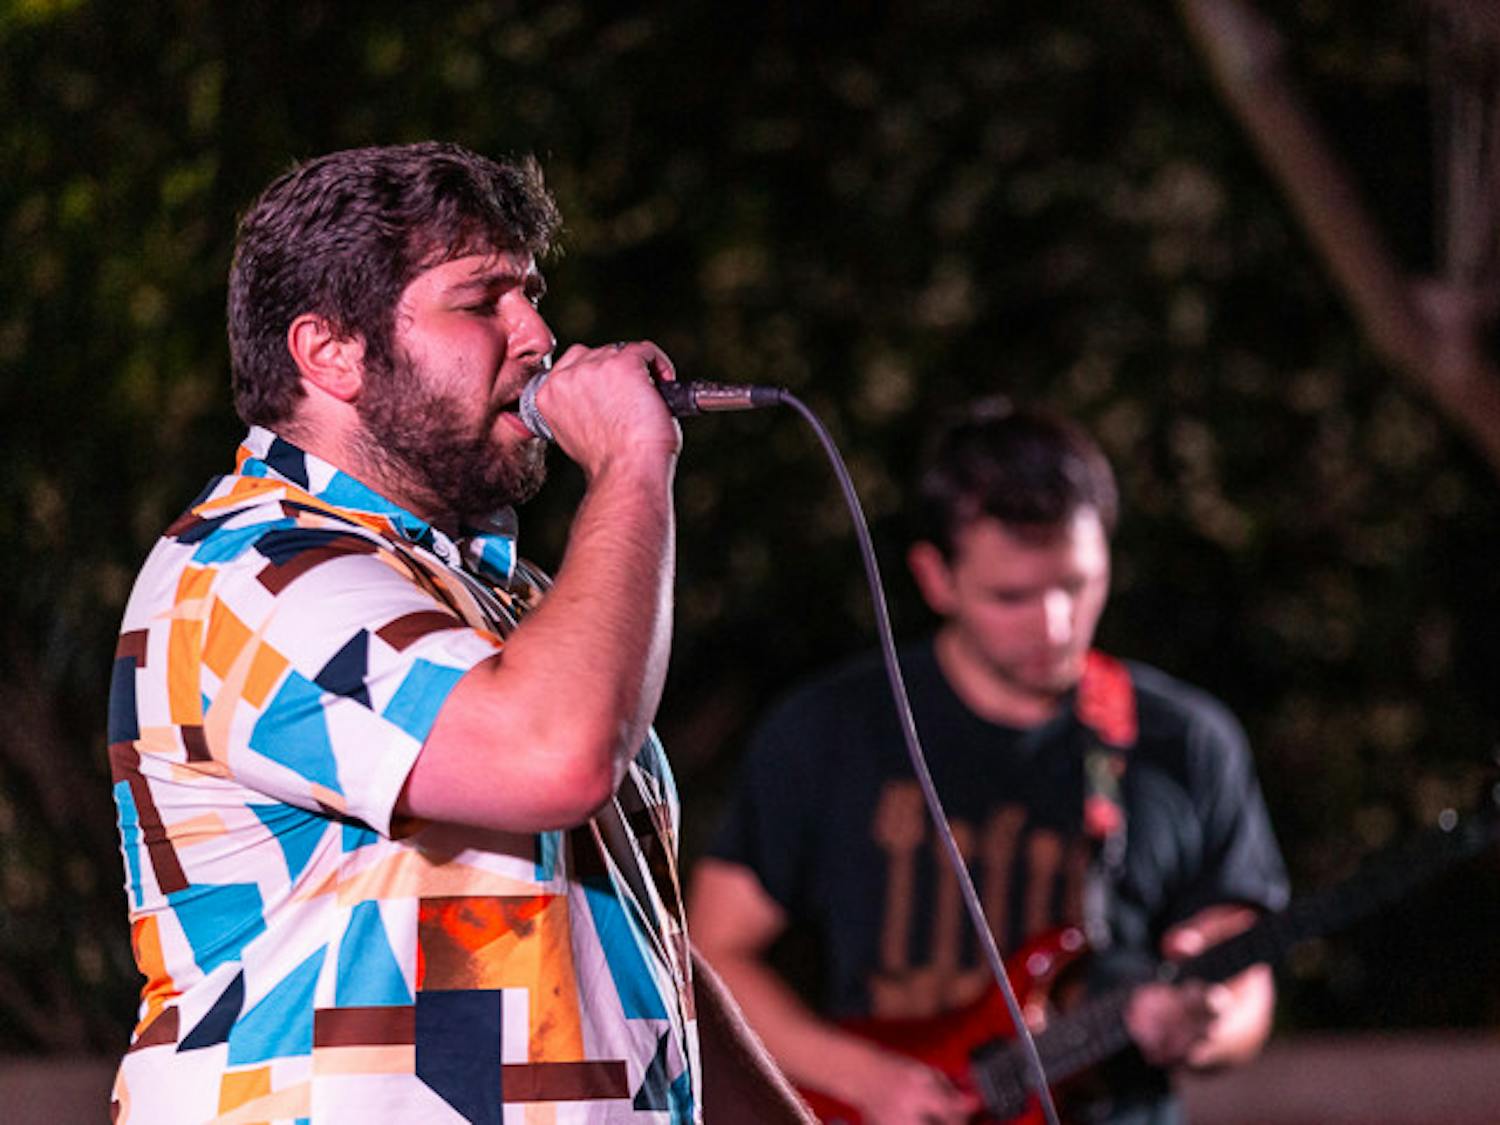 The House Band singer and third-year international business and finance student Tyler Bomse (on left) and guitarist and third-year finance student Carter Vogt (on right) perform at the Battle of the Bands on Oct. 5, 2022. The House Band was selected as the winners of the competition.&nbsp;